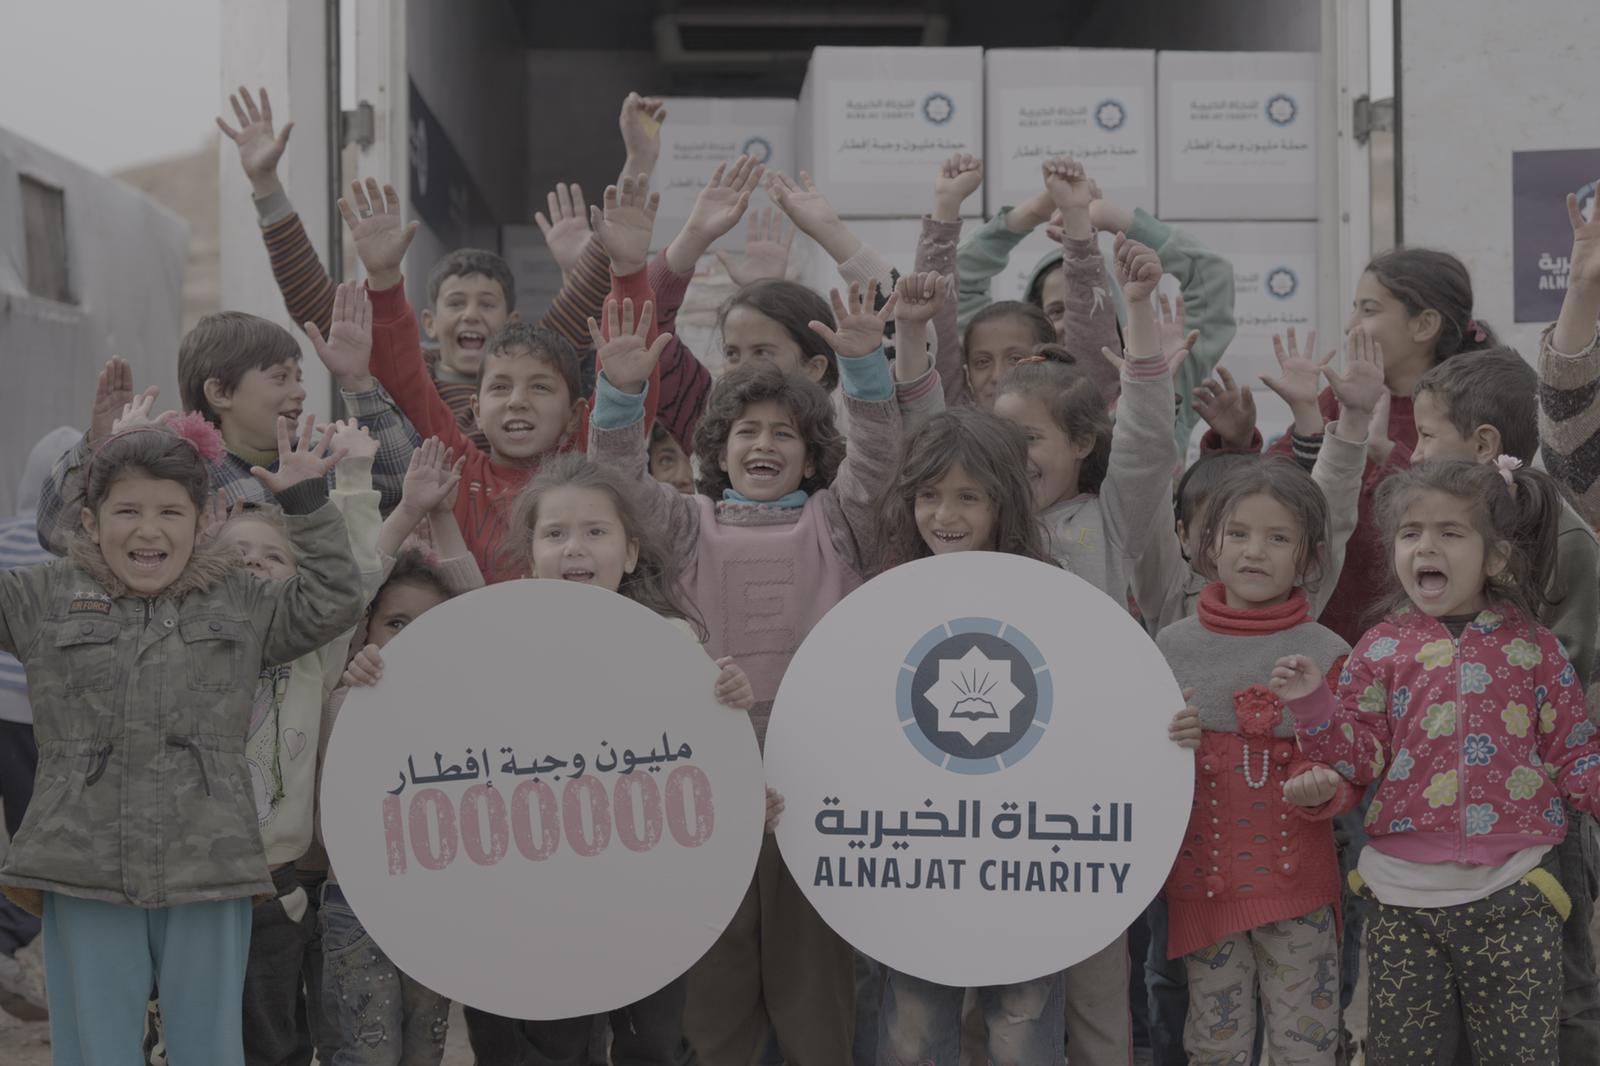 Kuwait's Al-Najat Charity delivers relief aid during the Holy Month of Ramadan